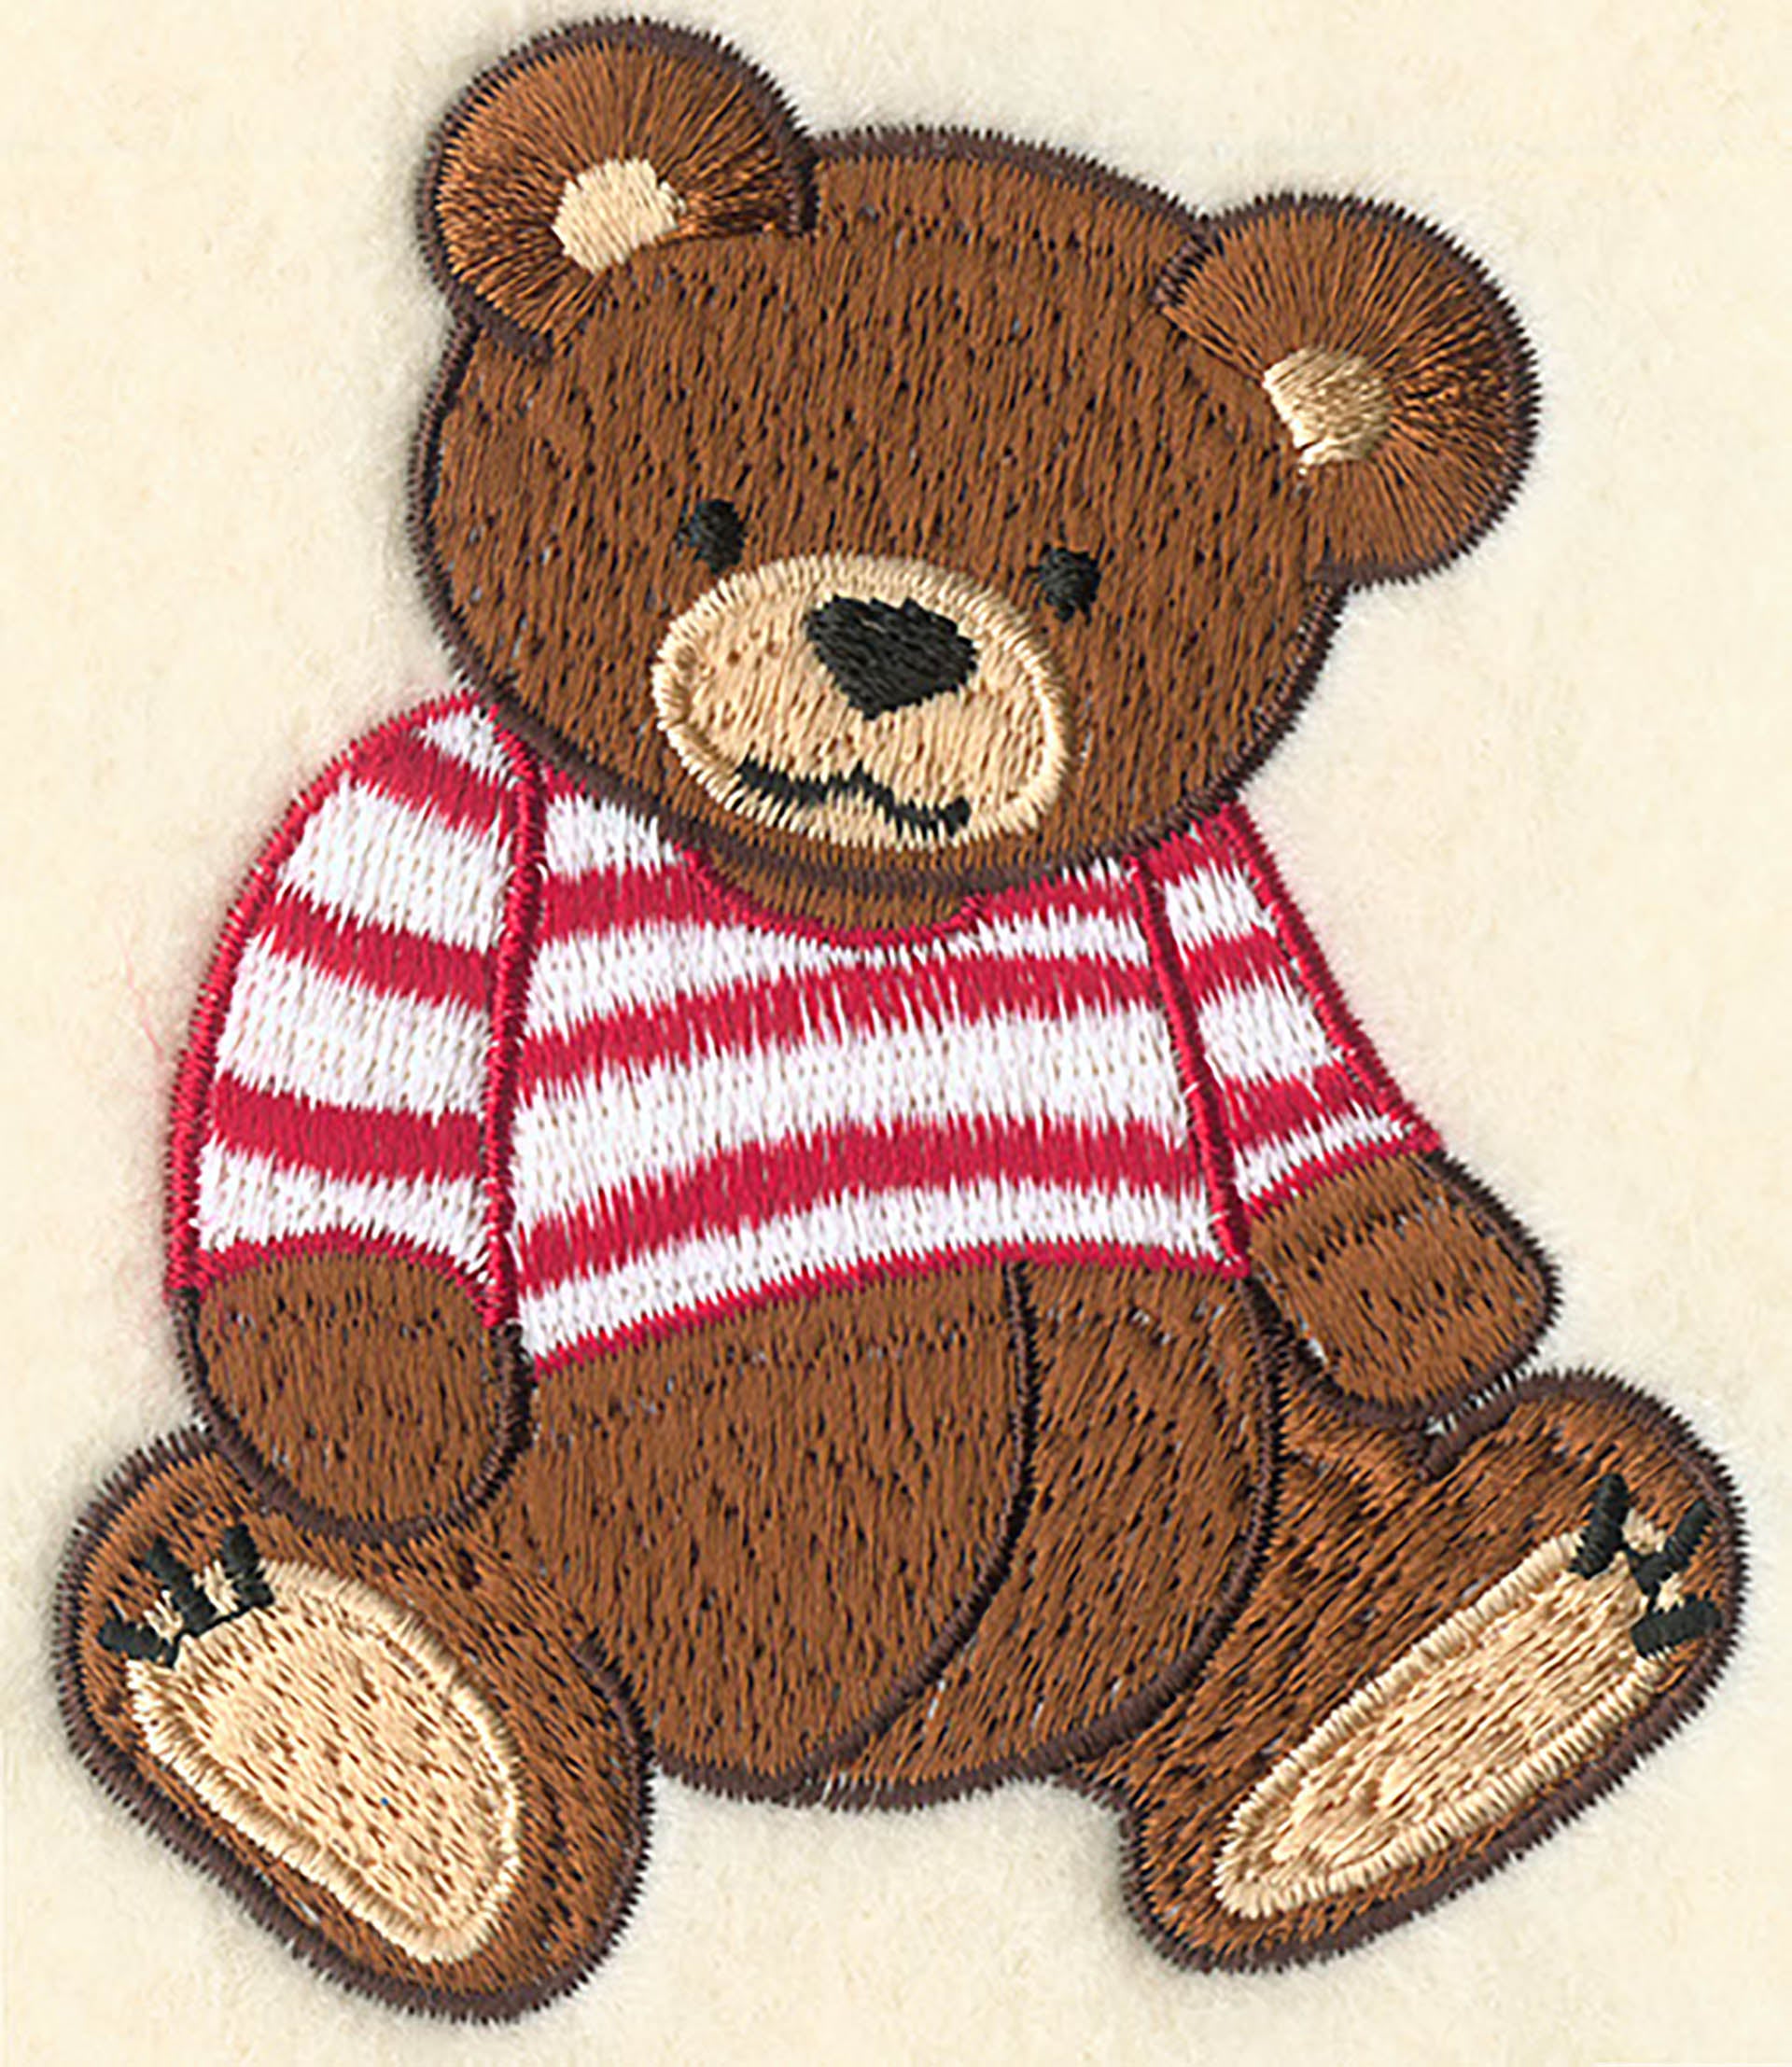 Get Well Soon Bear Embroidery Design